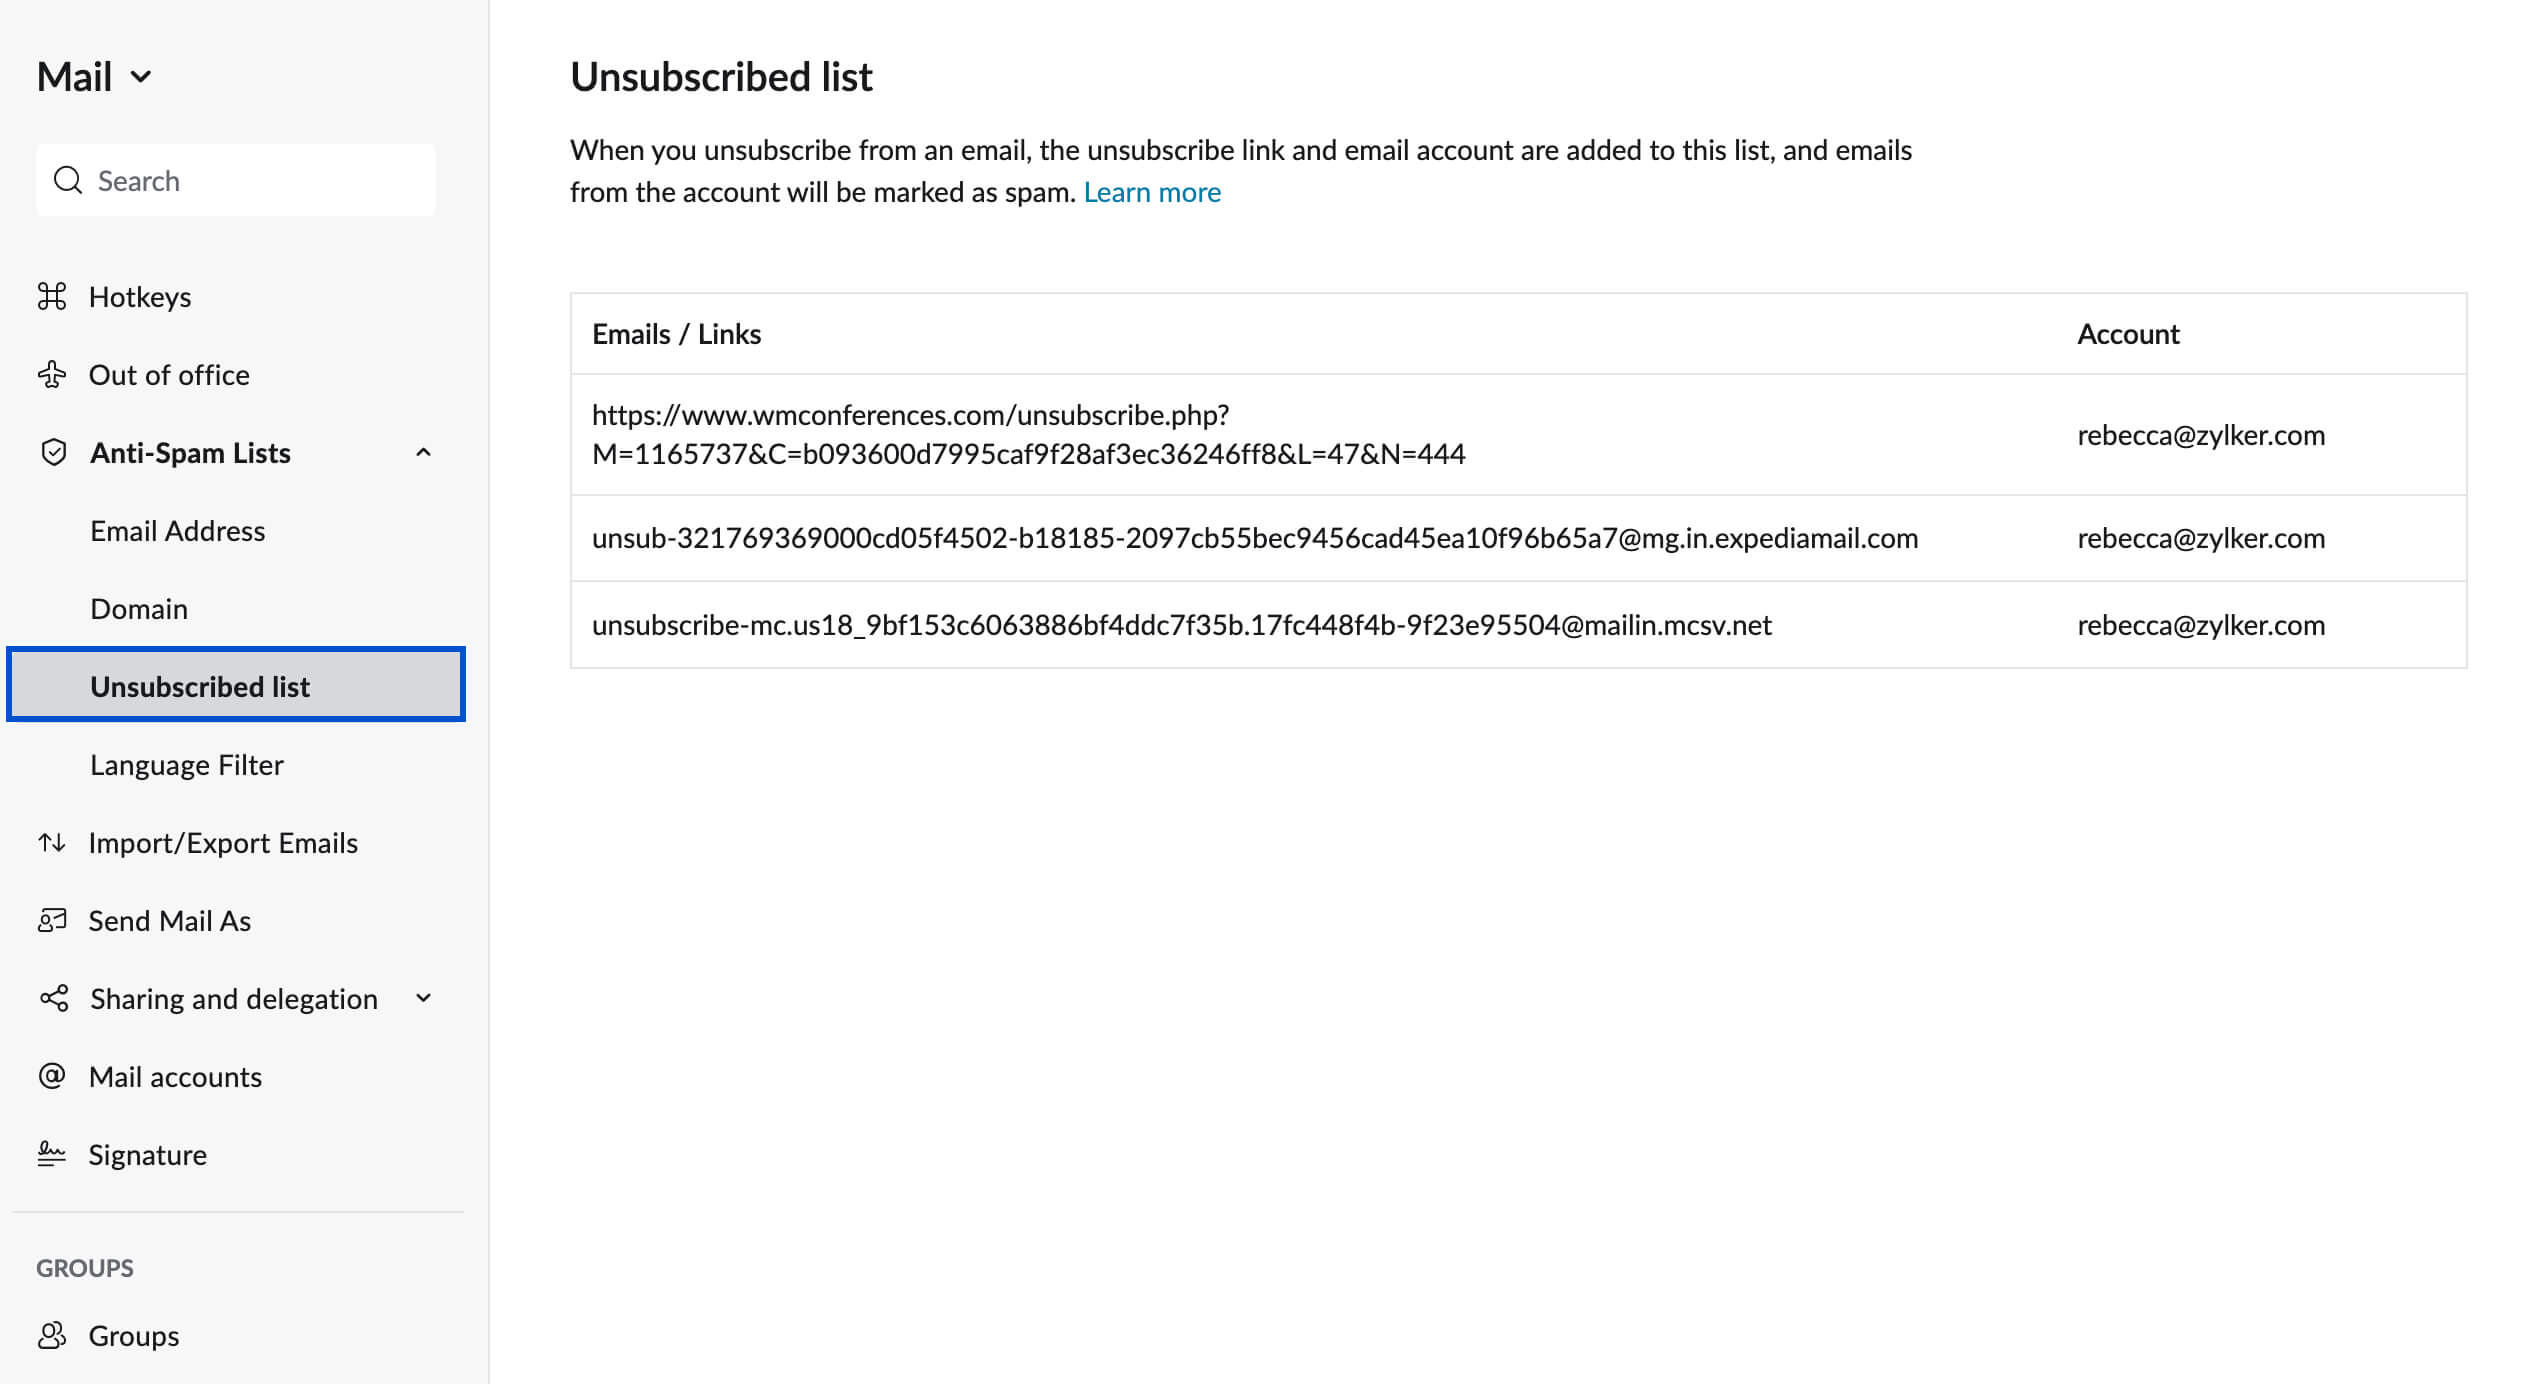 unsubscribed list